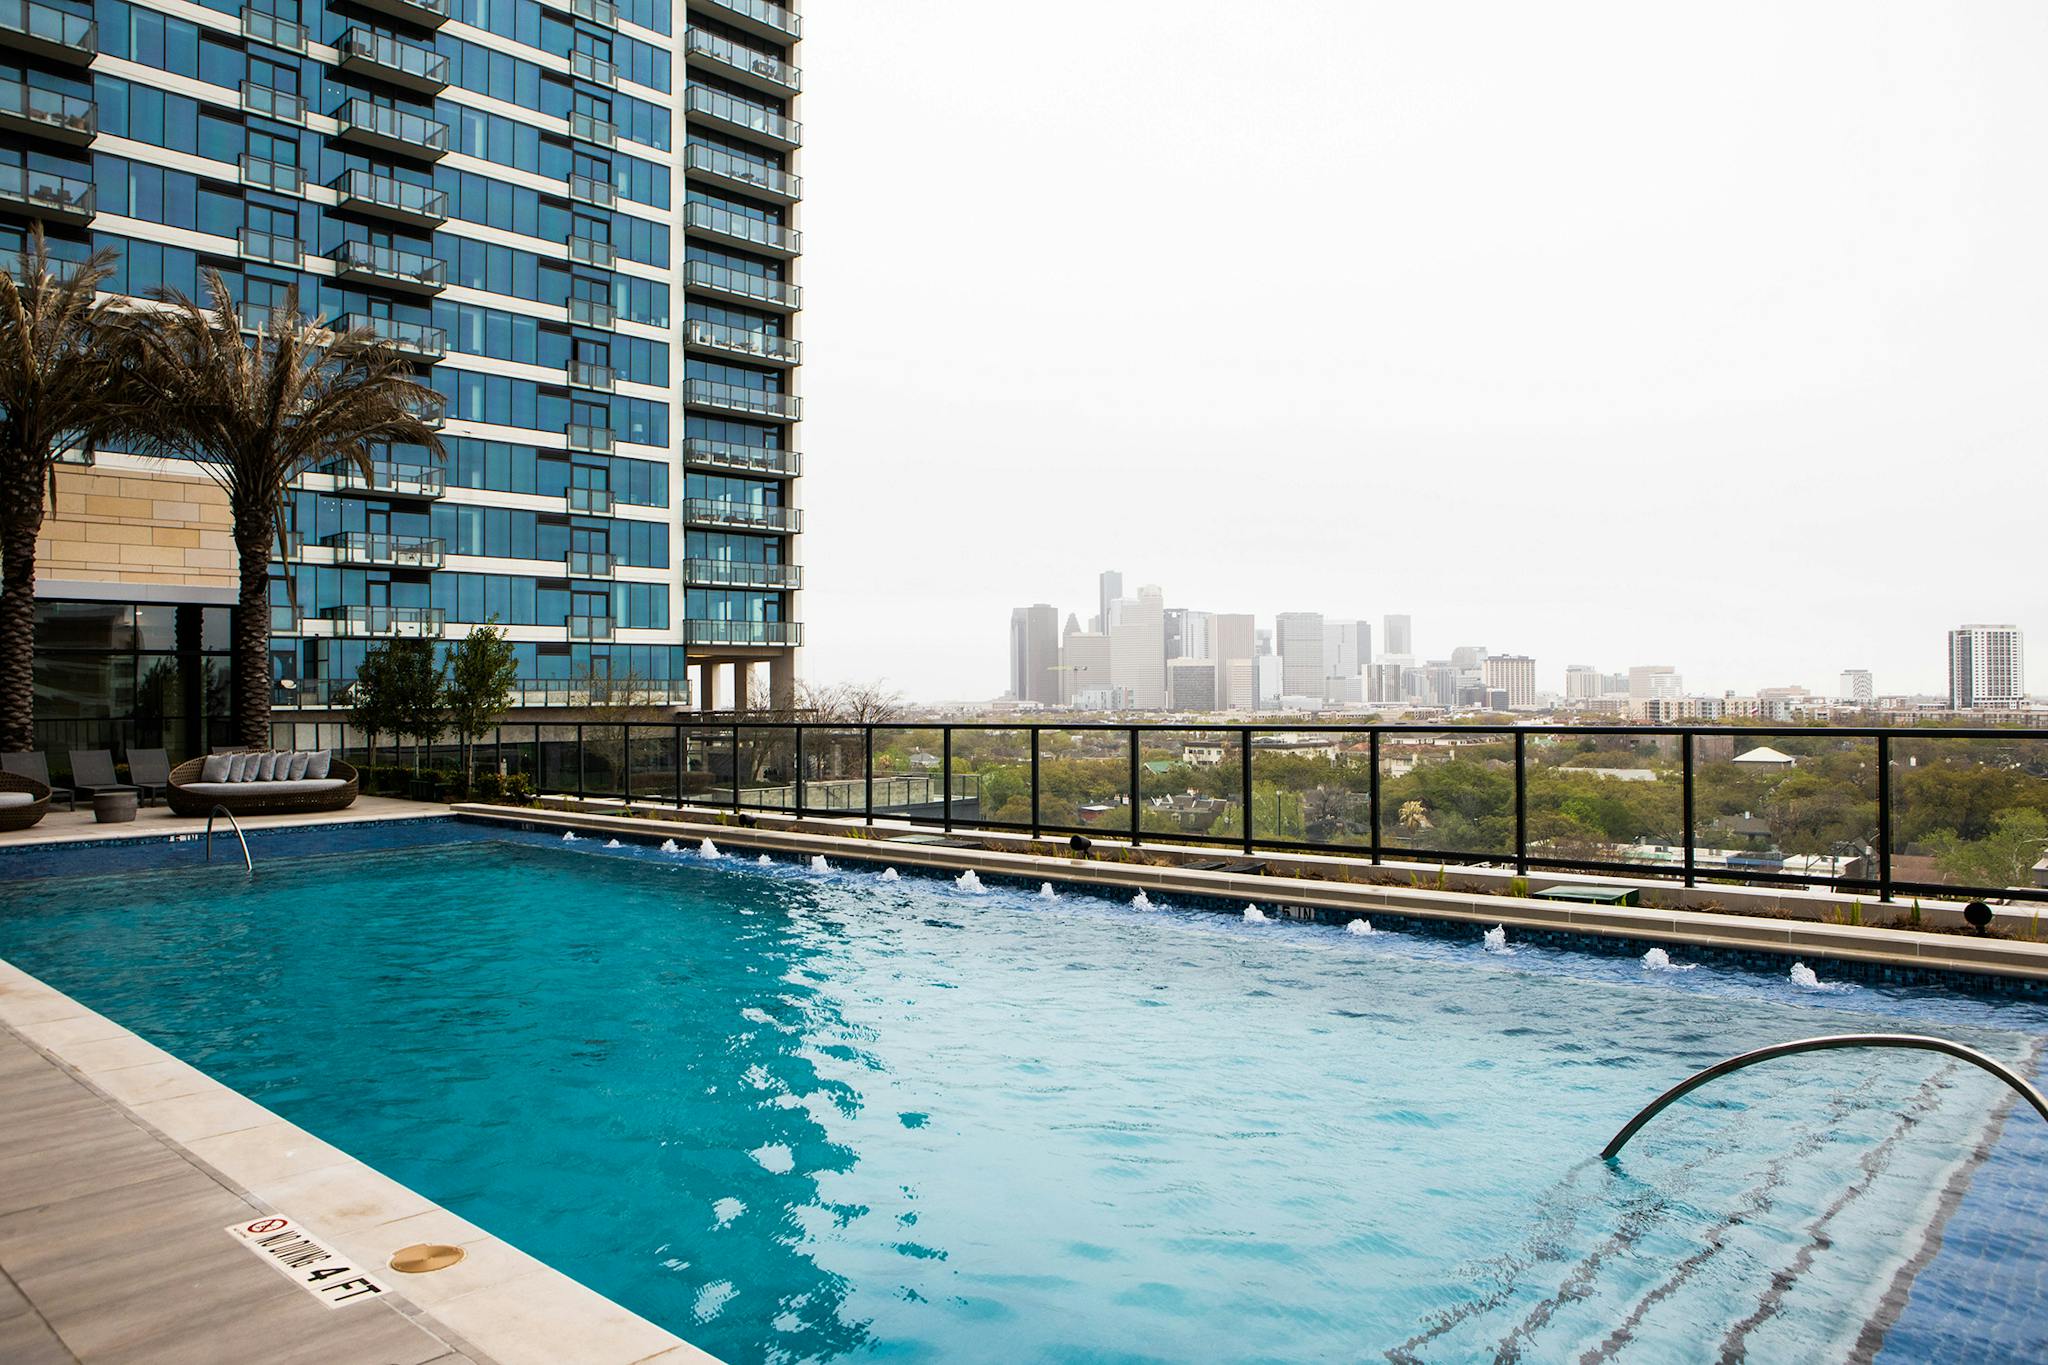 “You feel like you’re in this little European city,” Dan says about the hotel, where it even sounds like you’re across the pond: nearby church bells ring in crisply throughout the day. But the view of downtown Houston from the pool is unmistakeable.